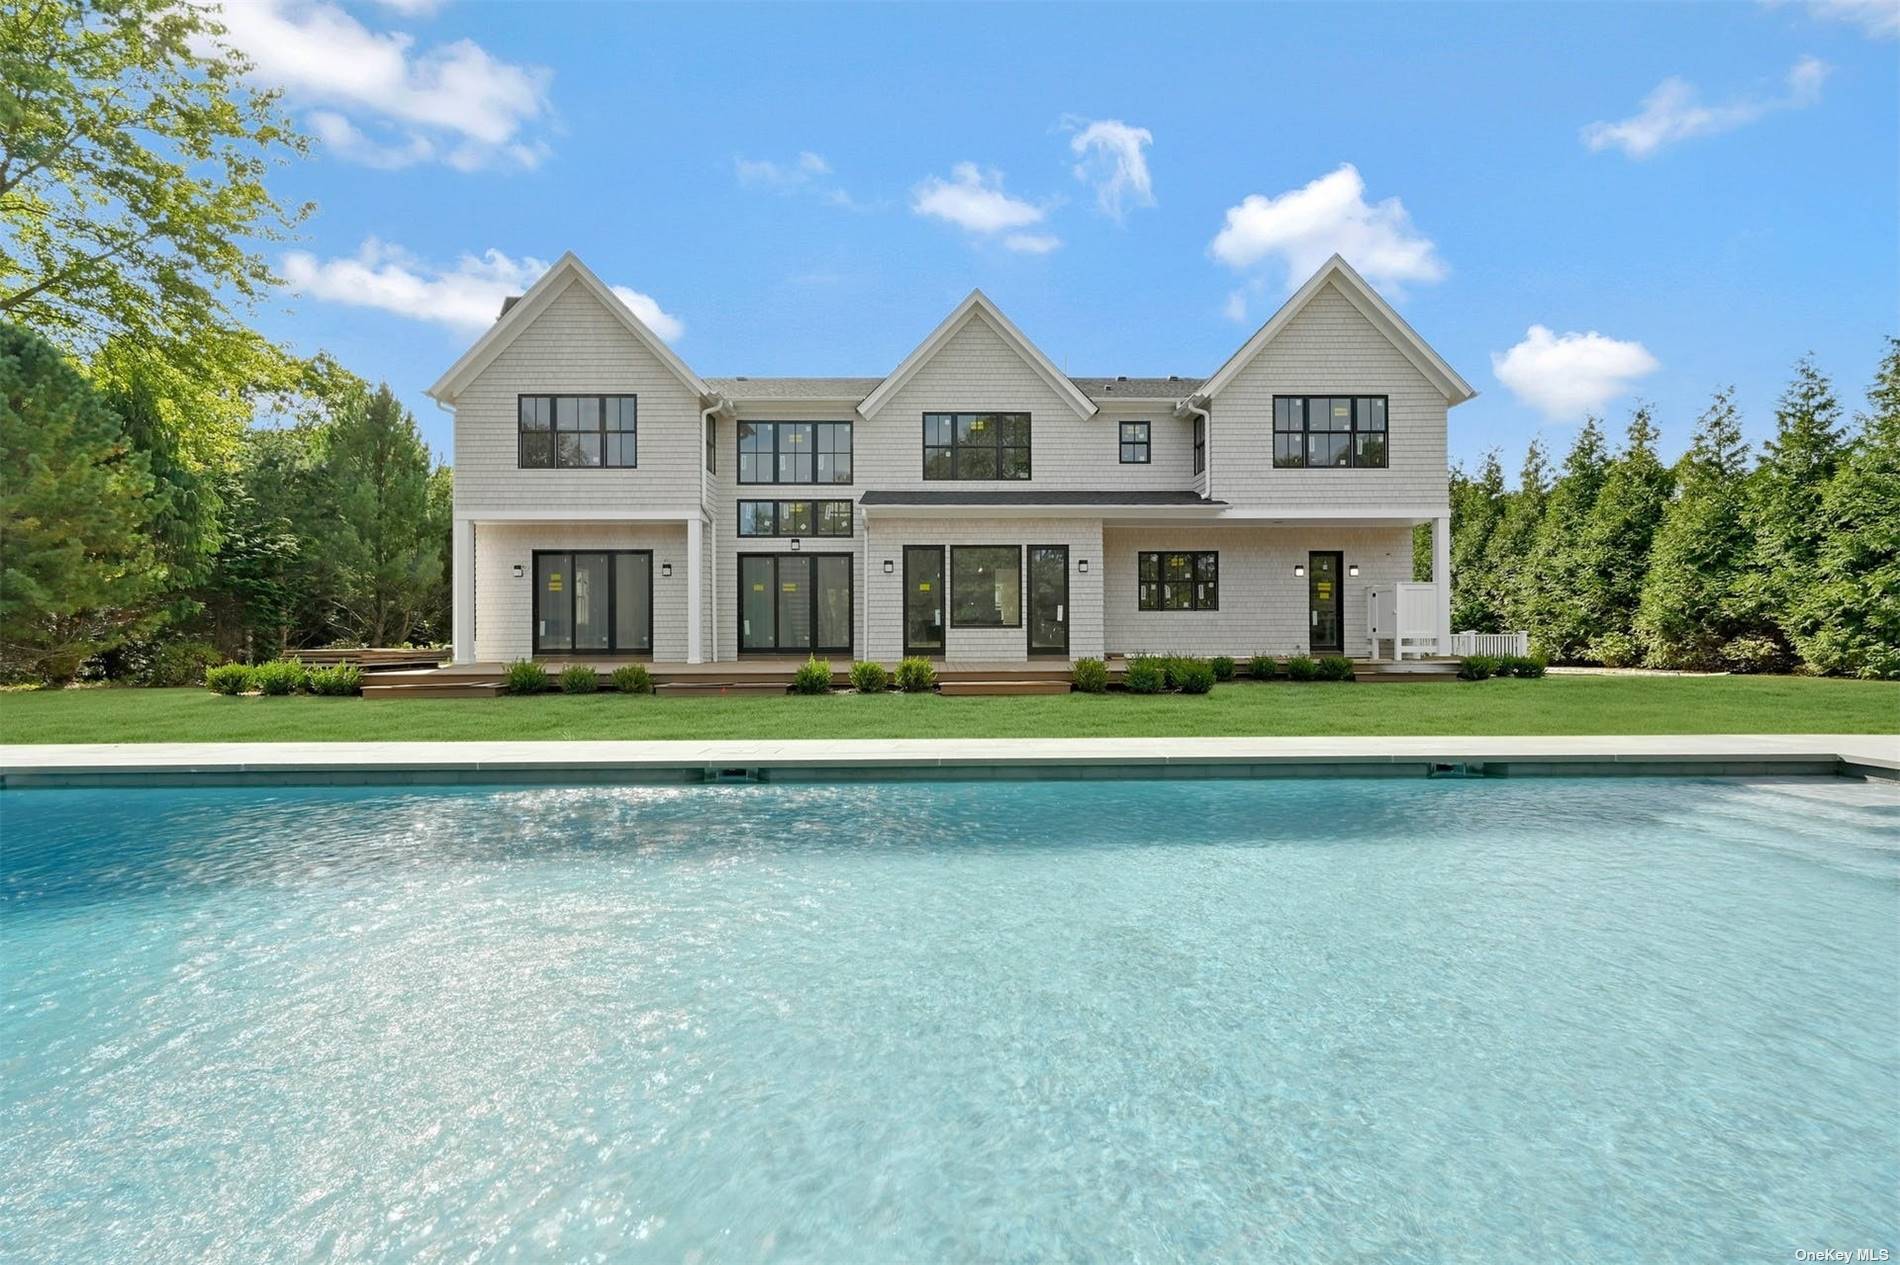 Beautiful post modern new construction in the Village of Quogue.